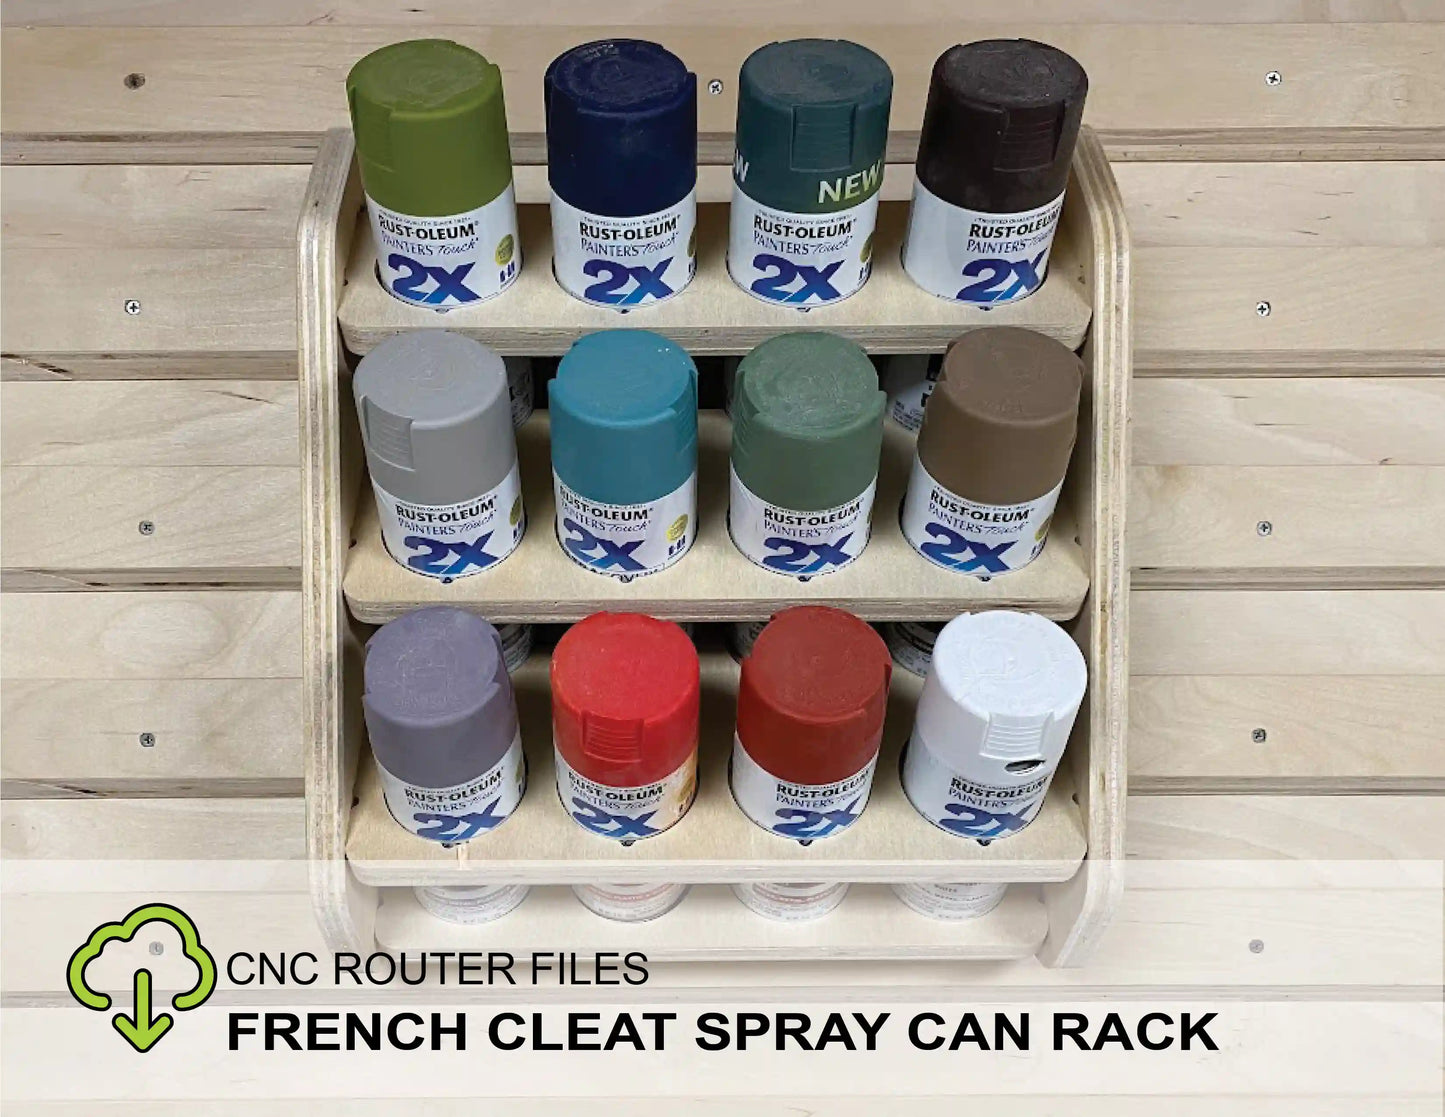 CNC Router Files French Cleat Spray Can Rack